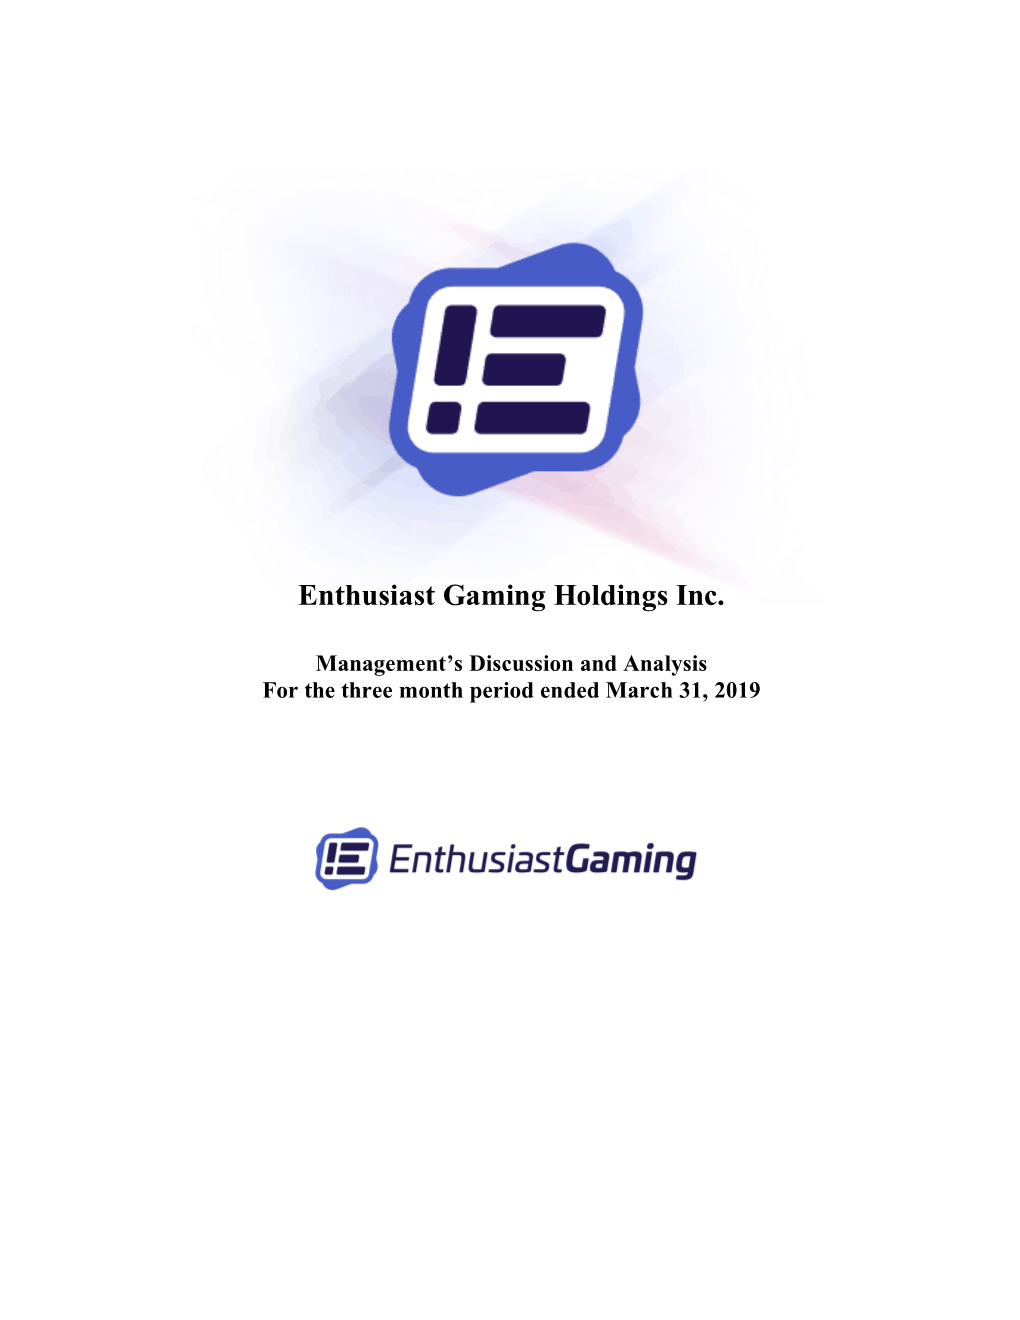 Enthusiast Gaming Holdings Inc